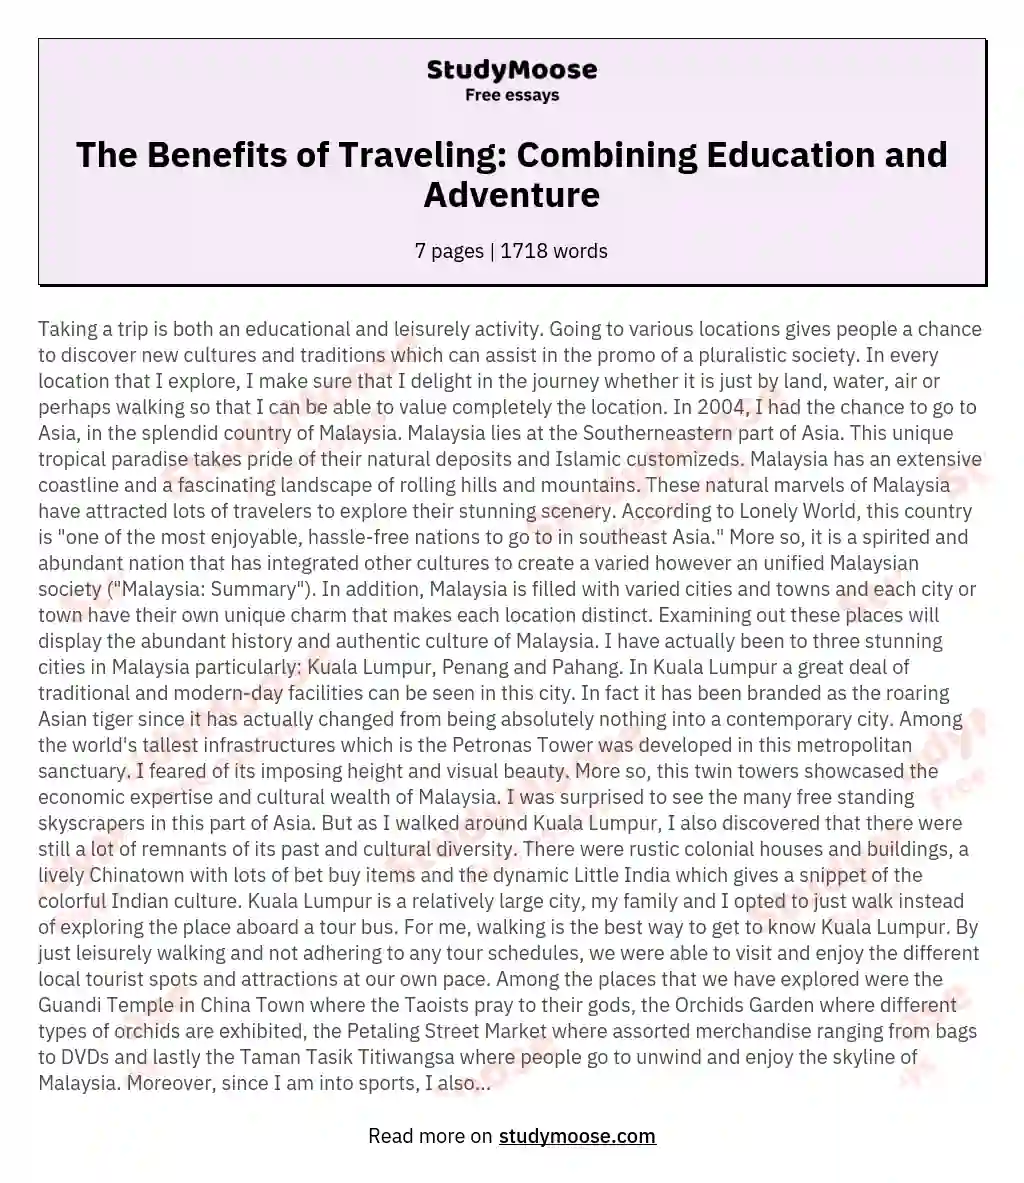 The Benefits of Traveling: Combining Education and Adventure essay